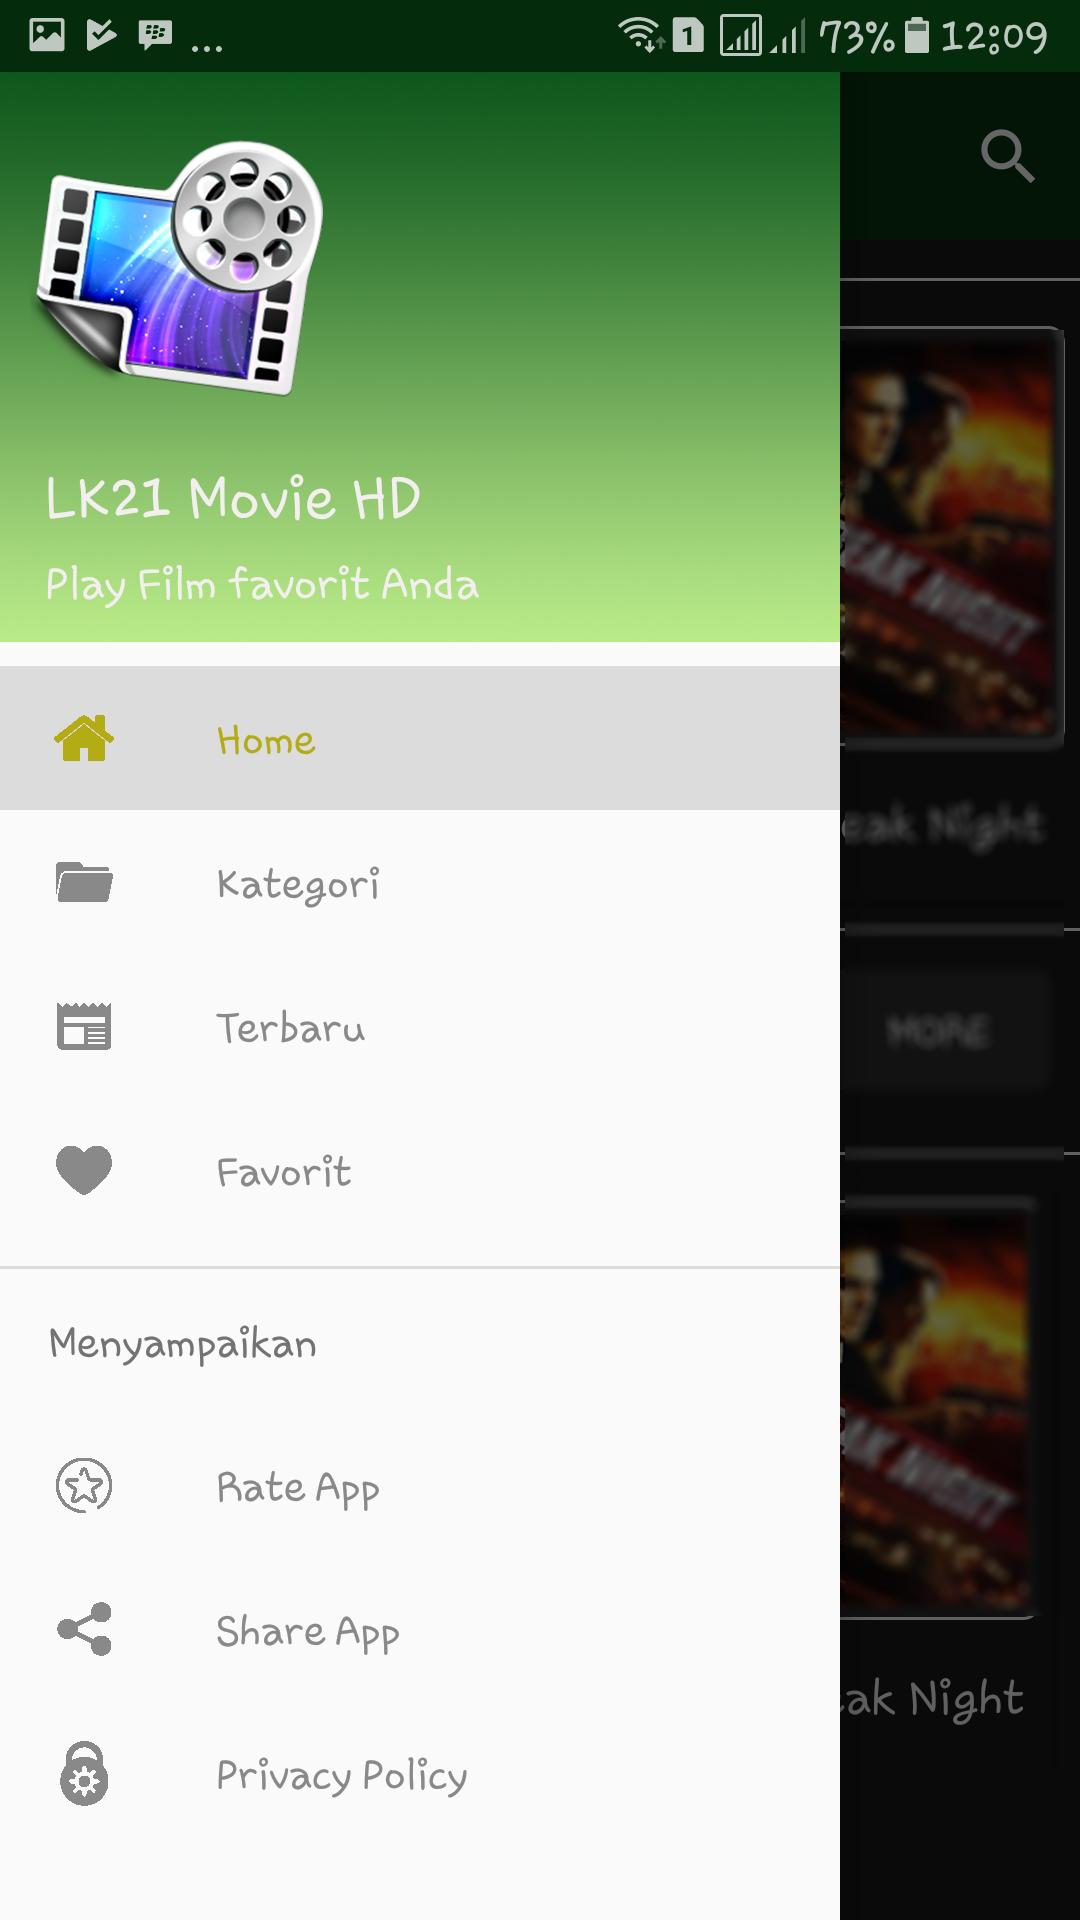 Nonton LK21 Movie Online 2018 For Android - APK Download